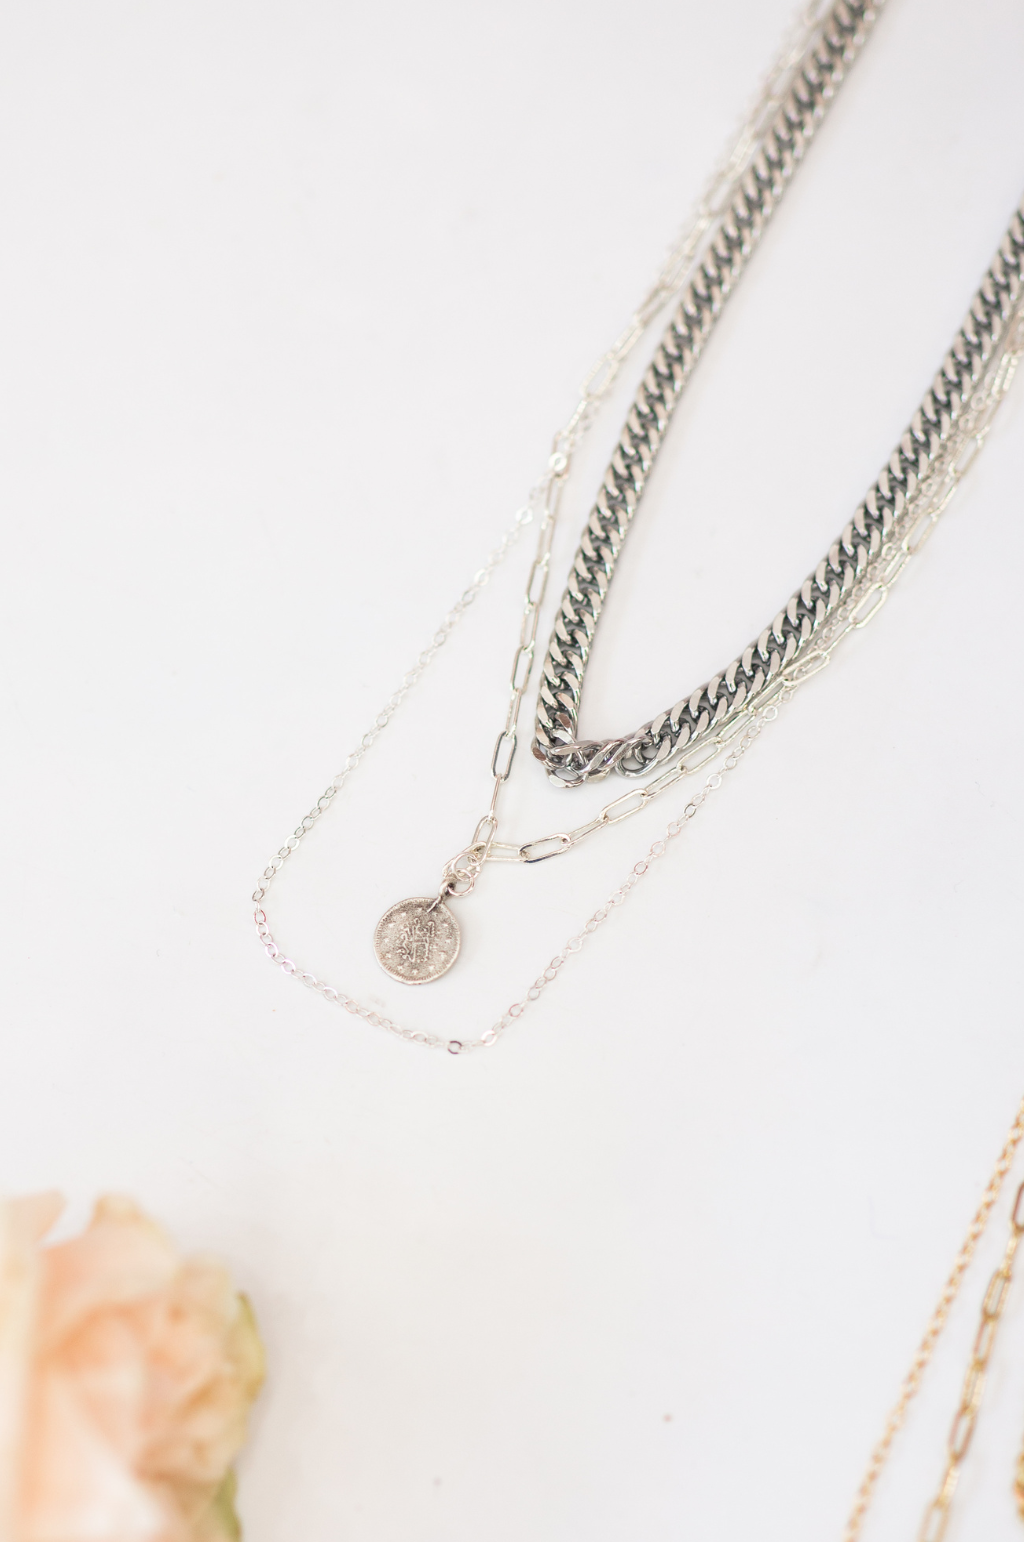 Triple Layered Coin Necklace by Annie Claire Designs - SoSis